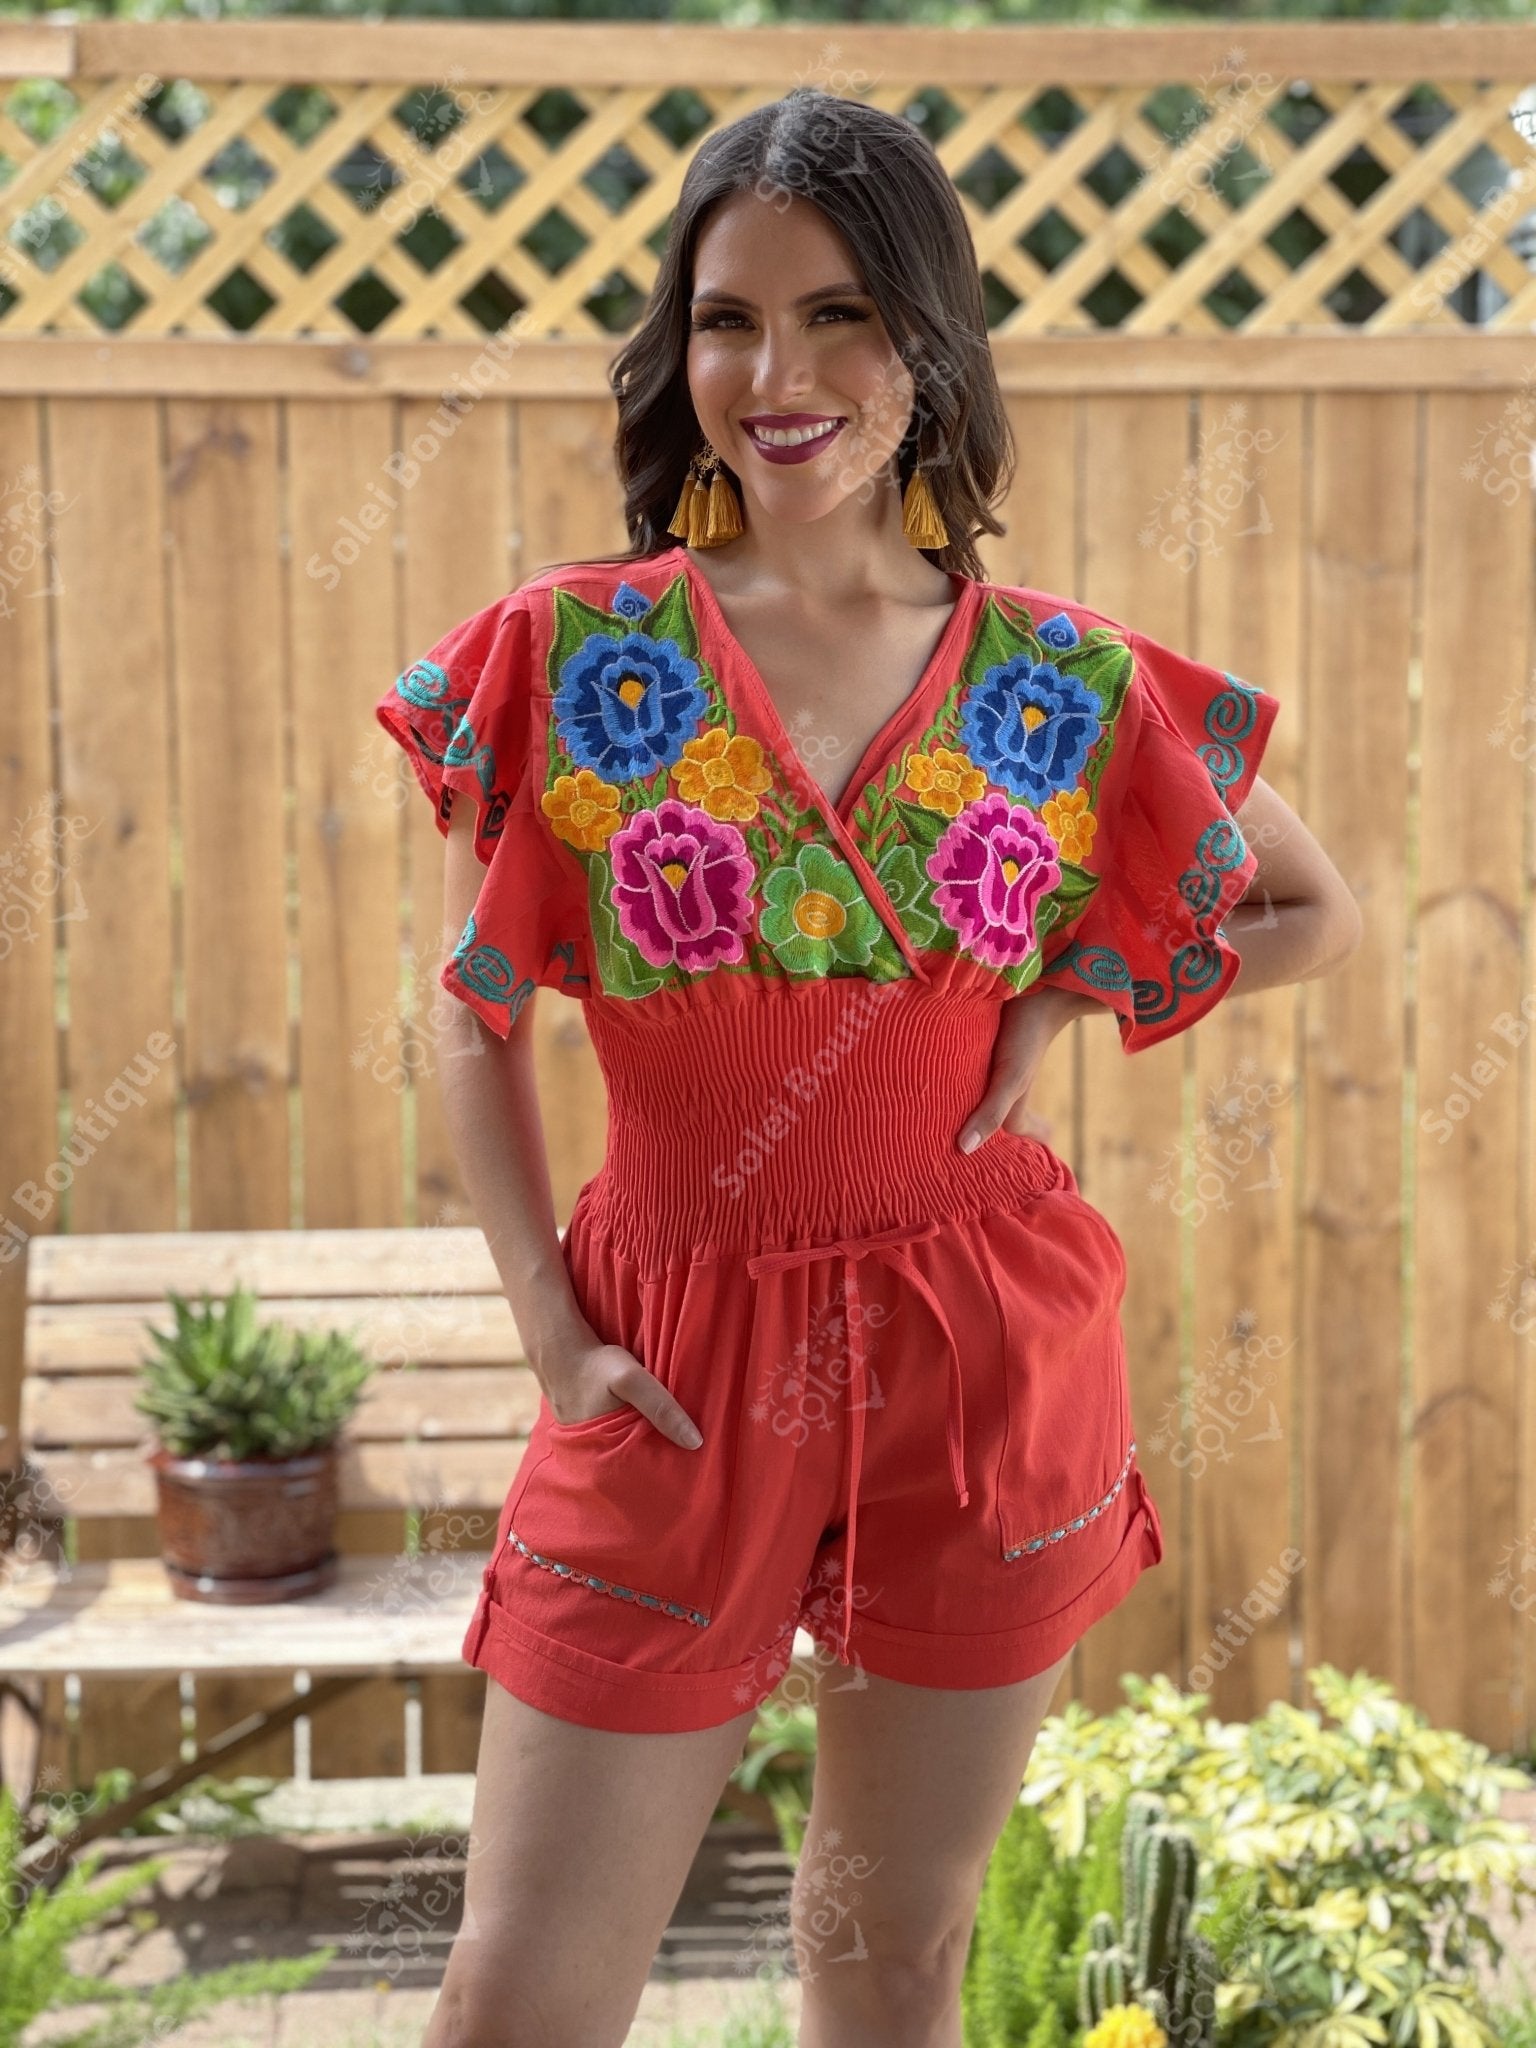 Butterfly Sleeve Romper. Mexican Floral Embroidered Romper - Solei Store